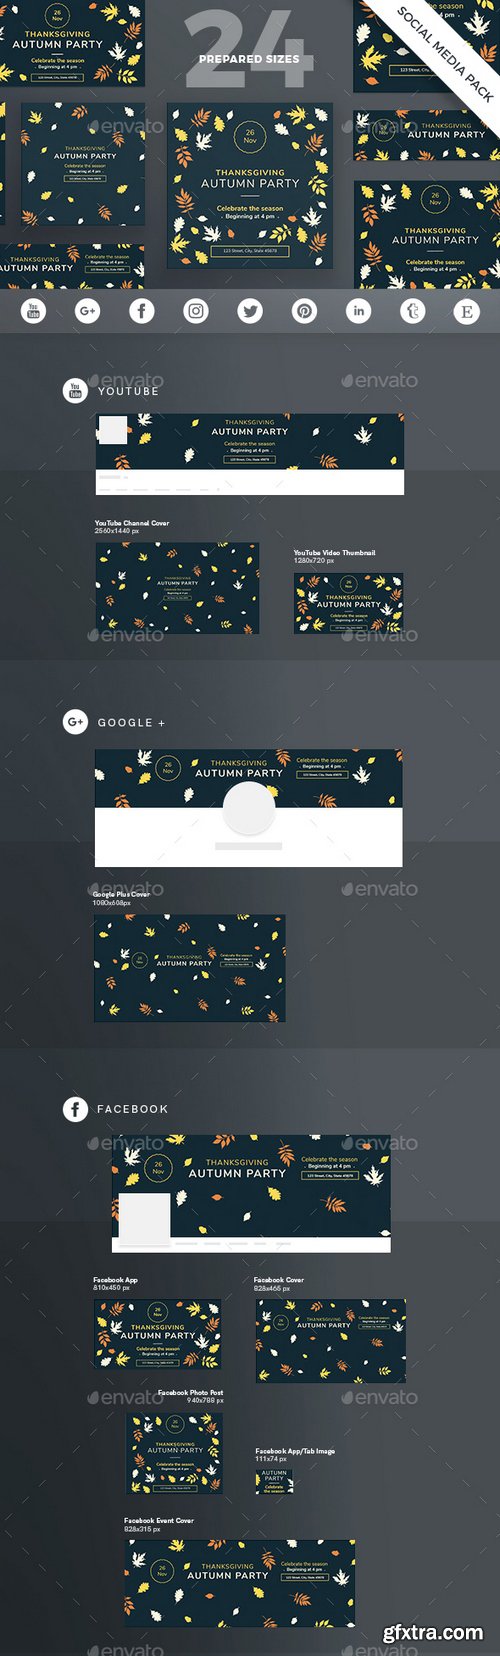 Graphicriver - Thanksgiving Party Social Media Pack 20671898